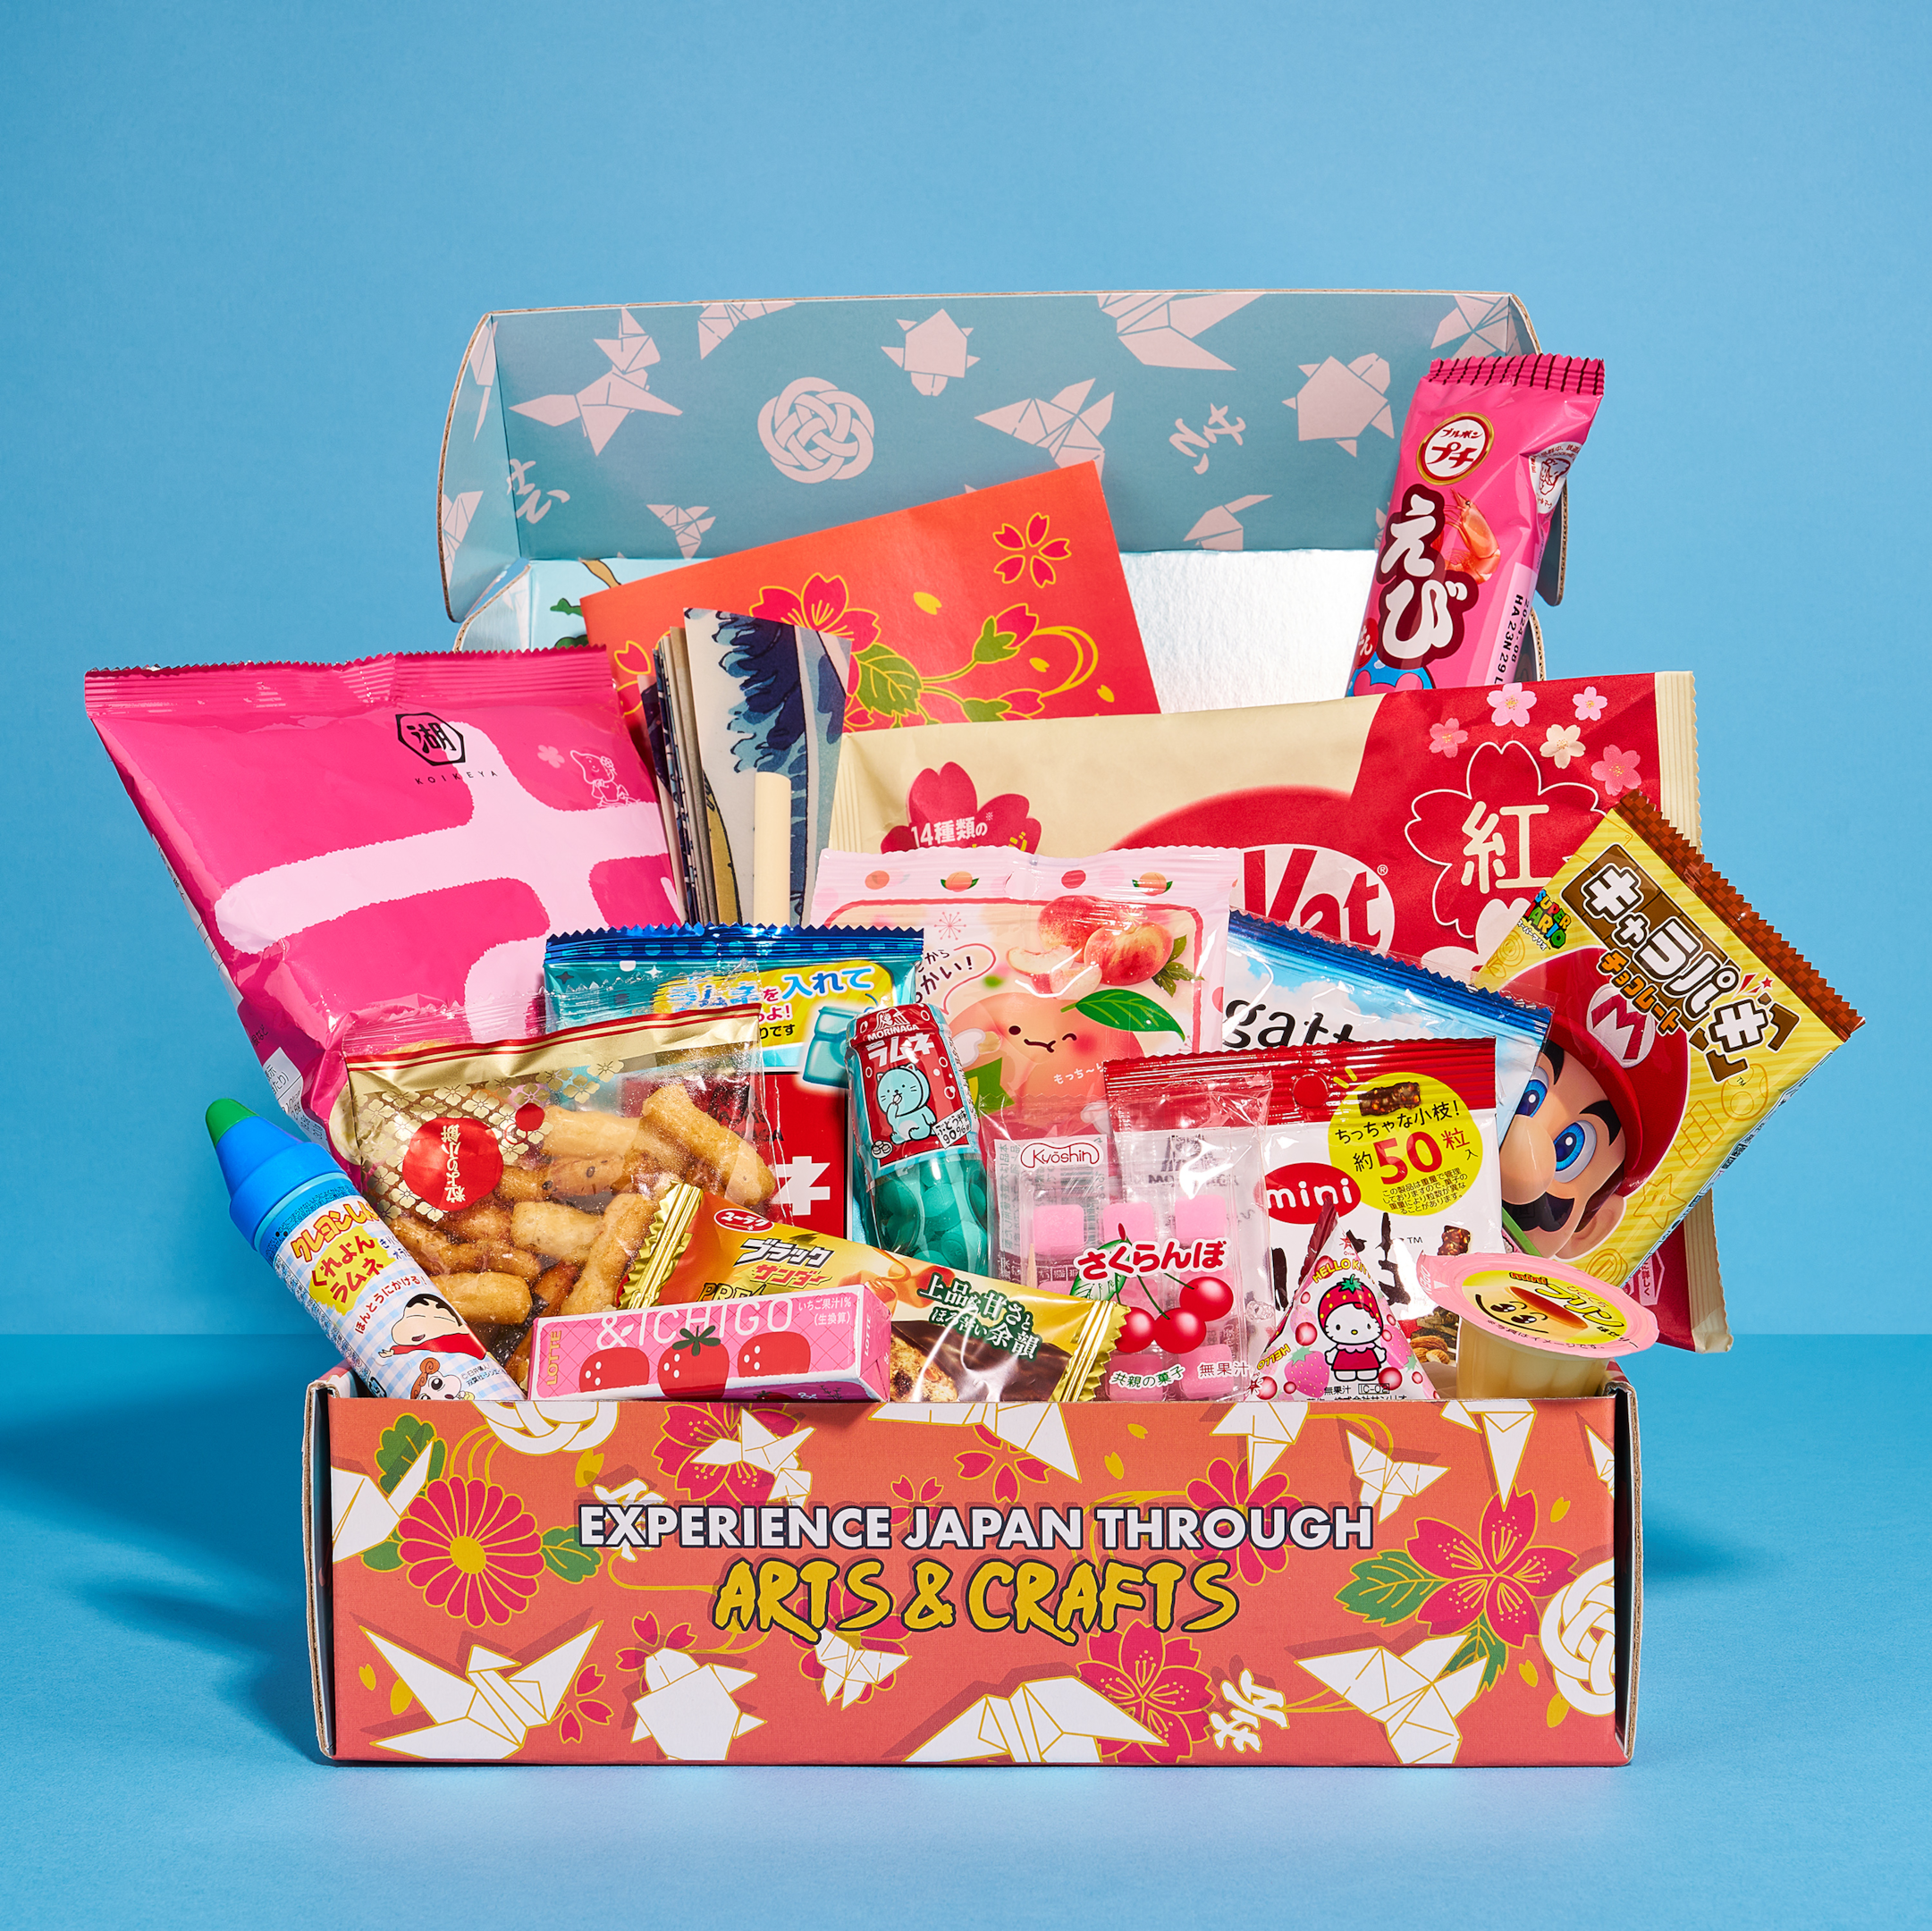 Japan Crate Arts & Crafts Box with different types of snacks